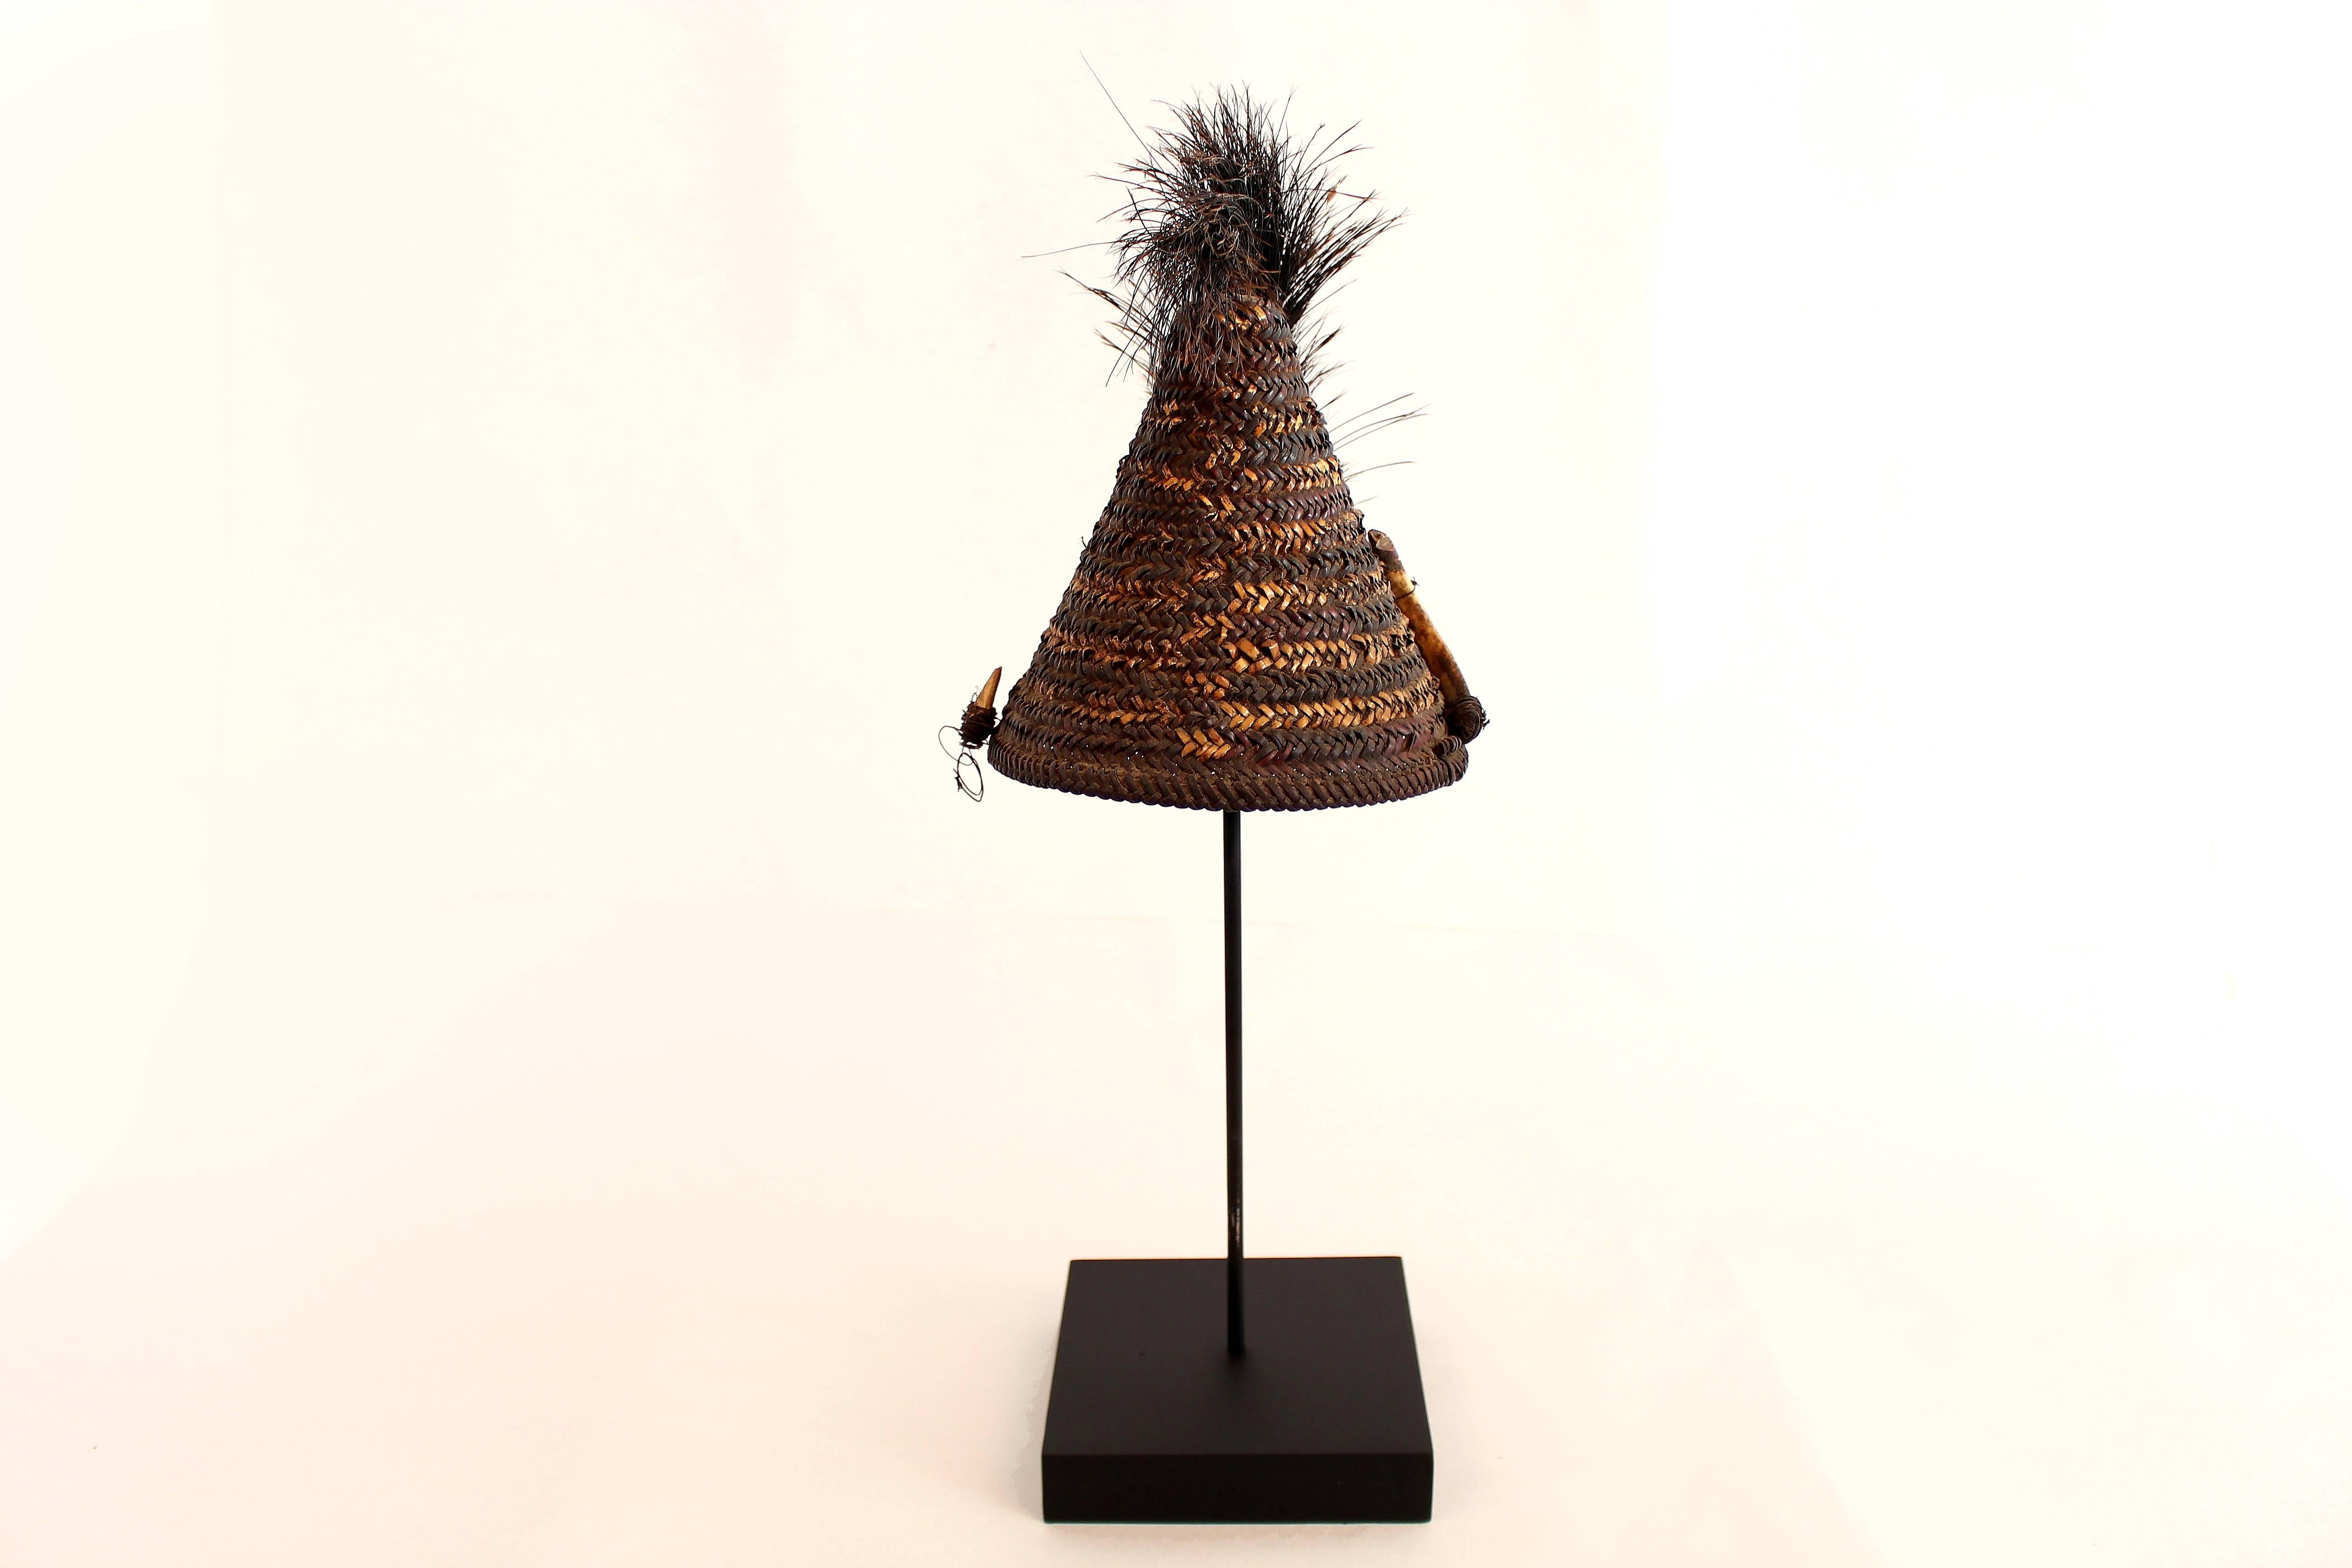 This woven hat features a plume of dark fur and a boar's tusk on one side. Though more decorative than protective, the accoutrements added symbolize social status. These particular items were trophies from a successful hunt.

Like the monumental